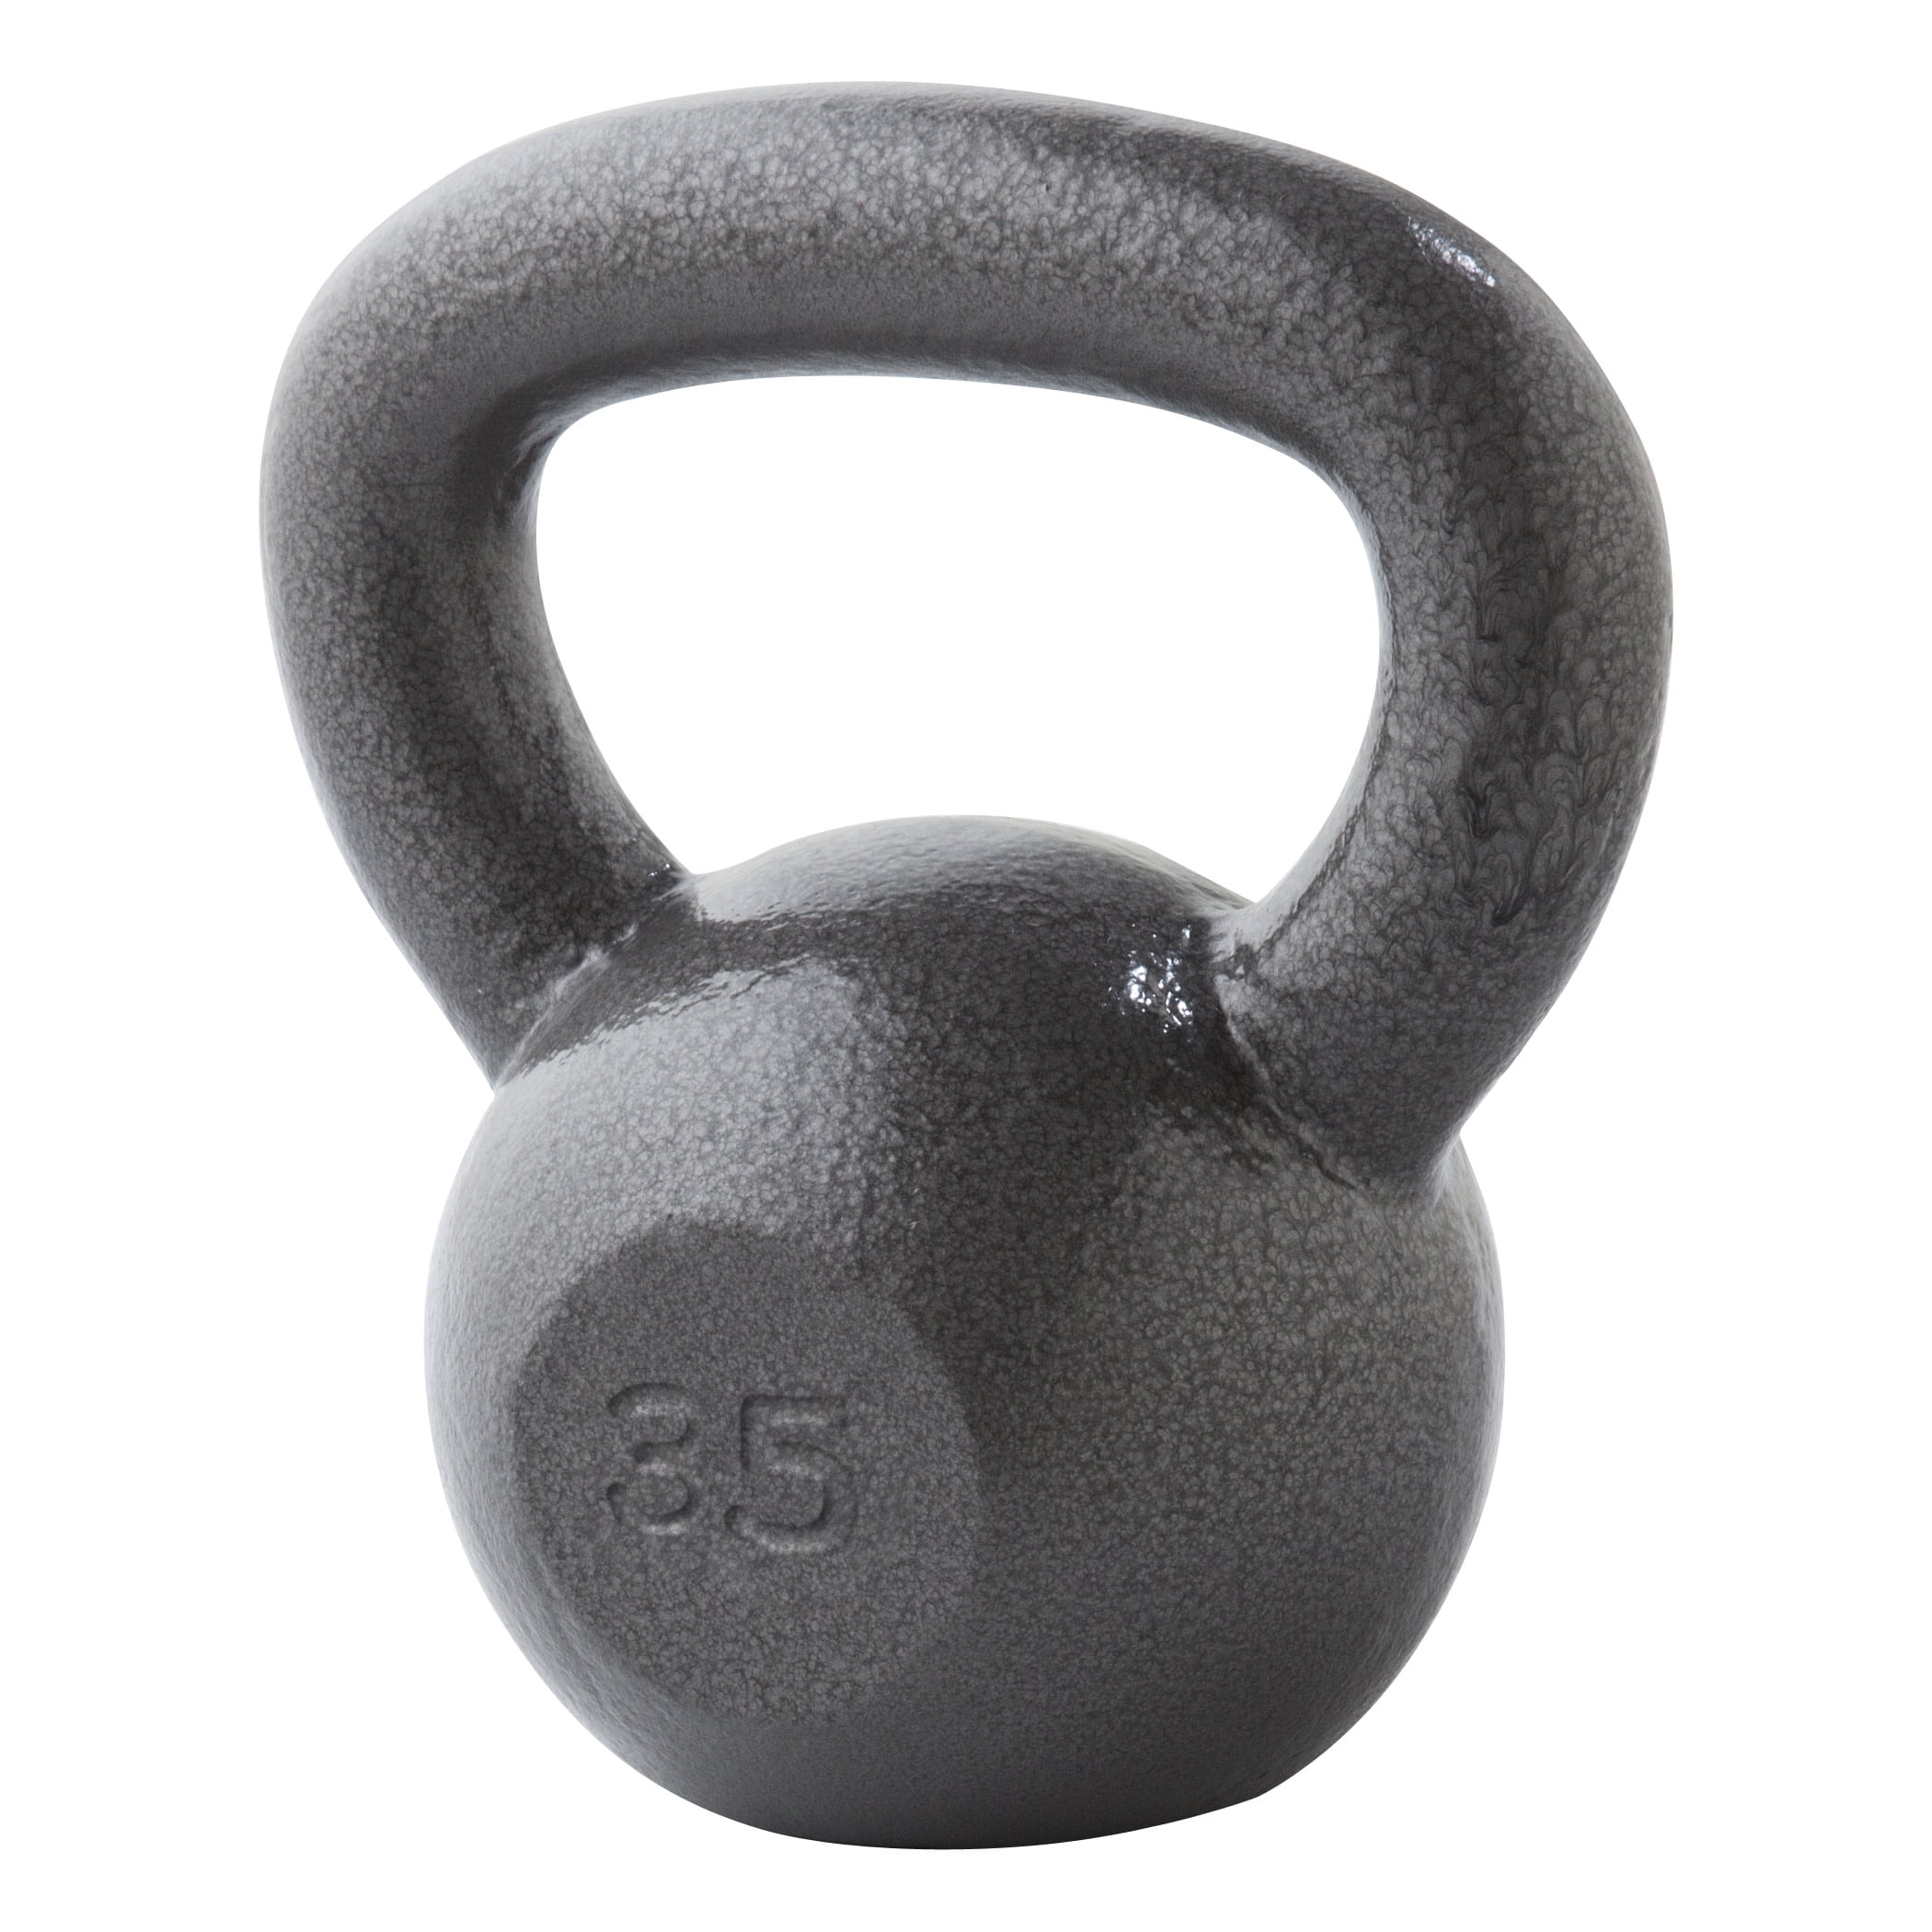 15-Pound 15 LBS Workout Kettlebell WeightsVinyl Coated Solid Cast Iron 